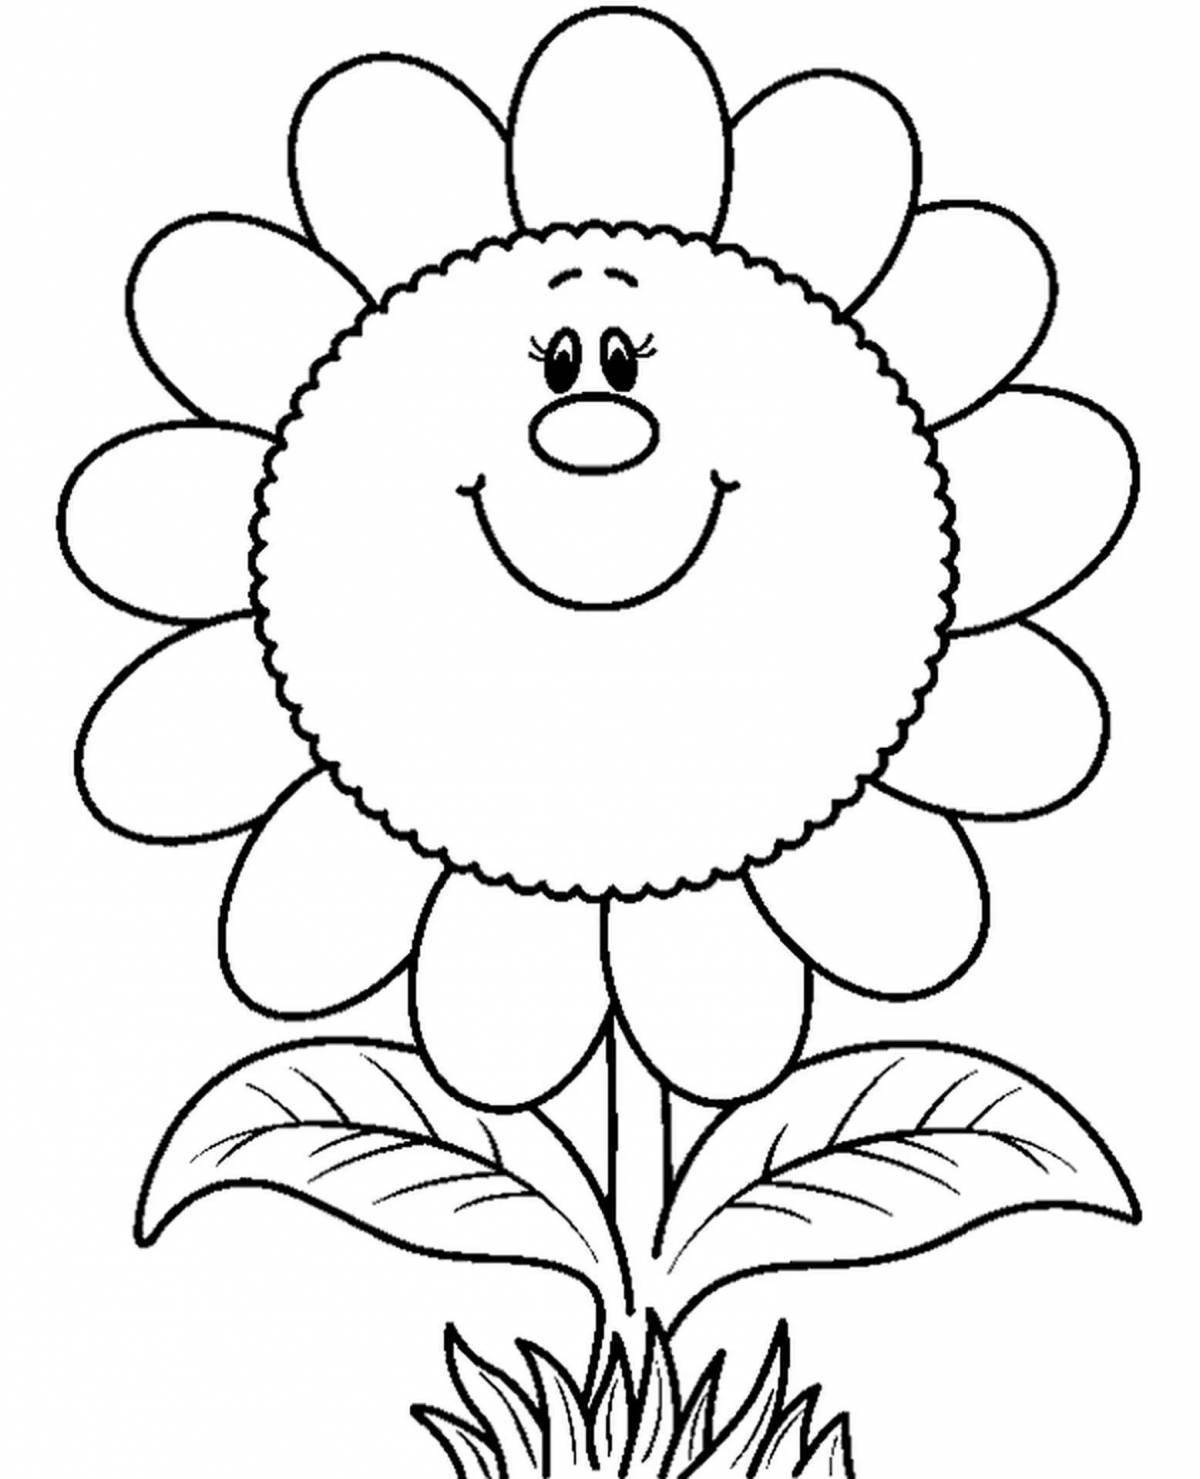 Outstanding flower coloring book for toddlers 2 3 years old